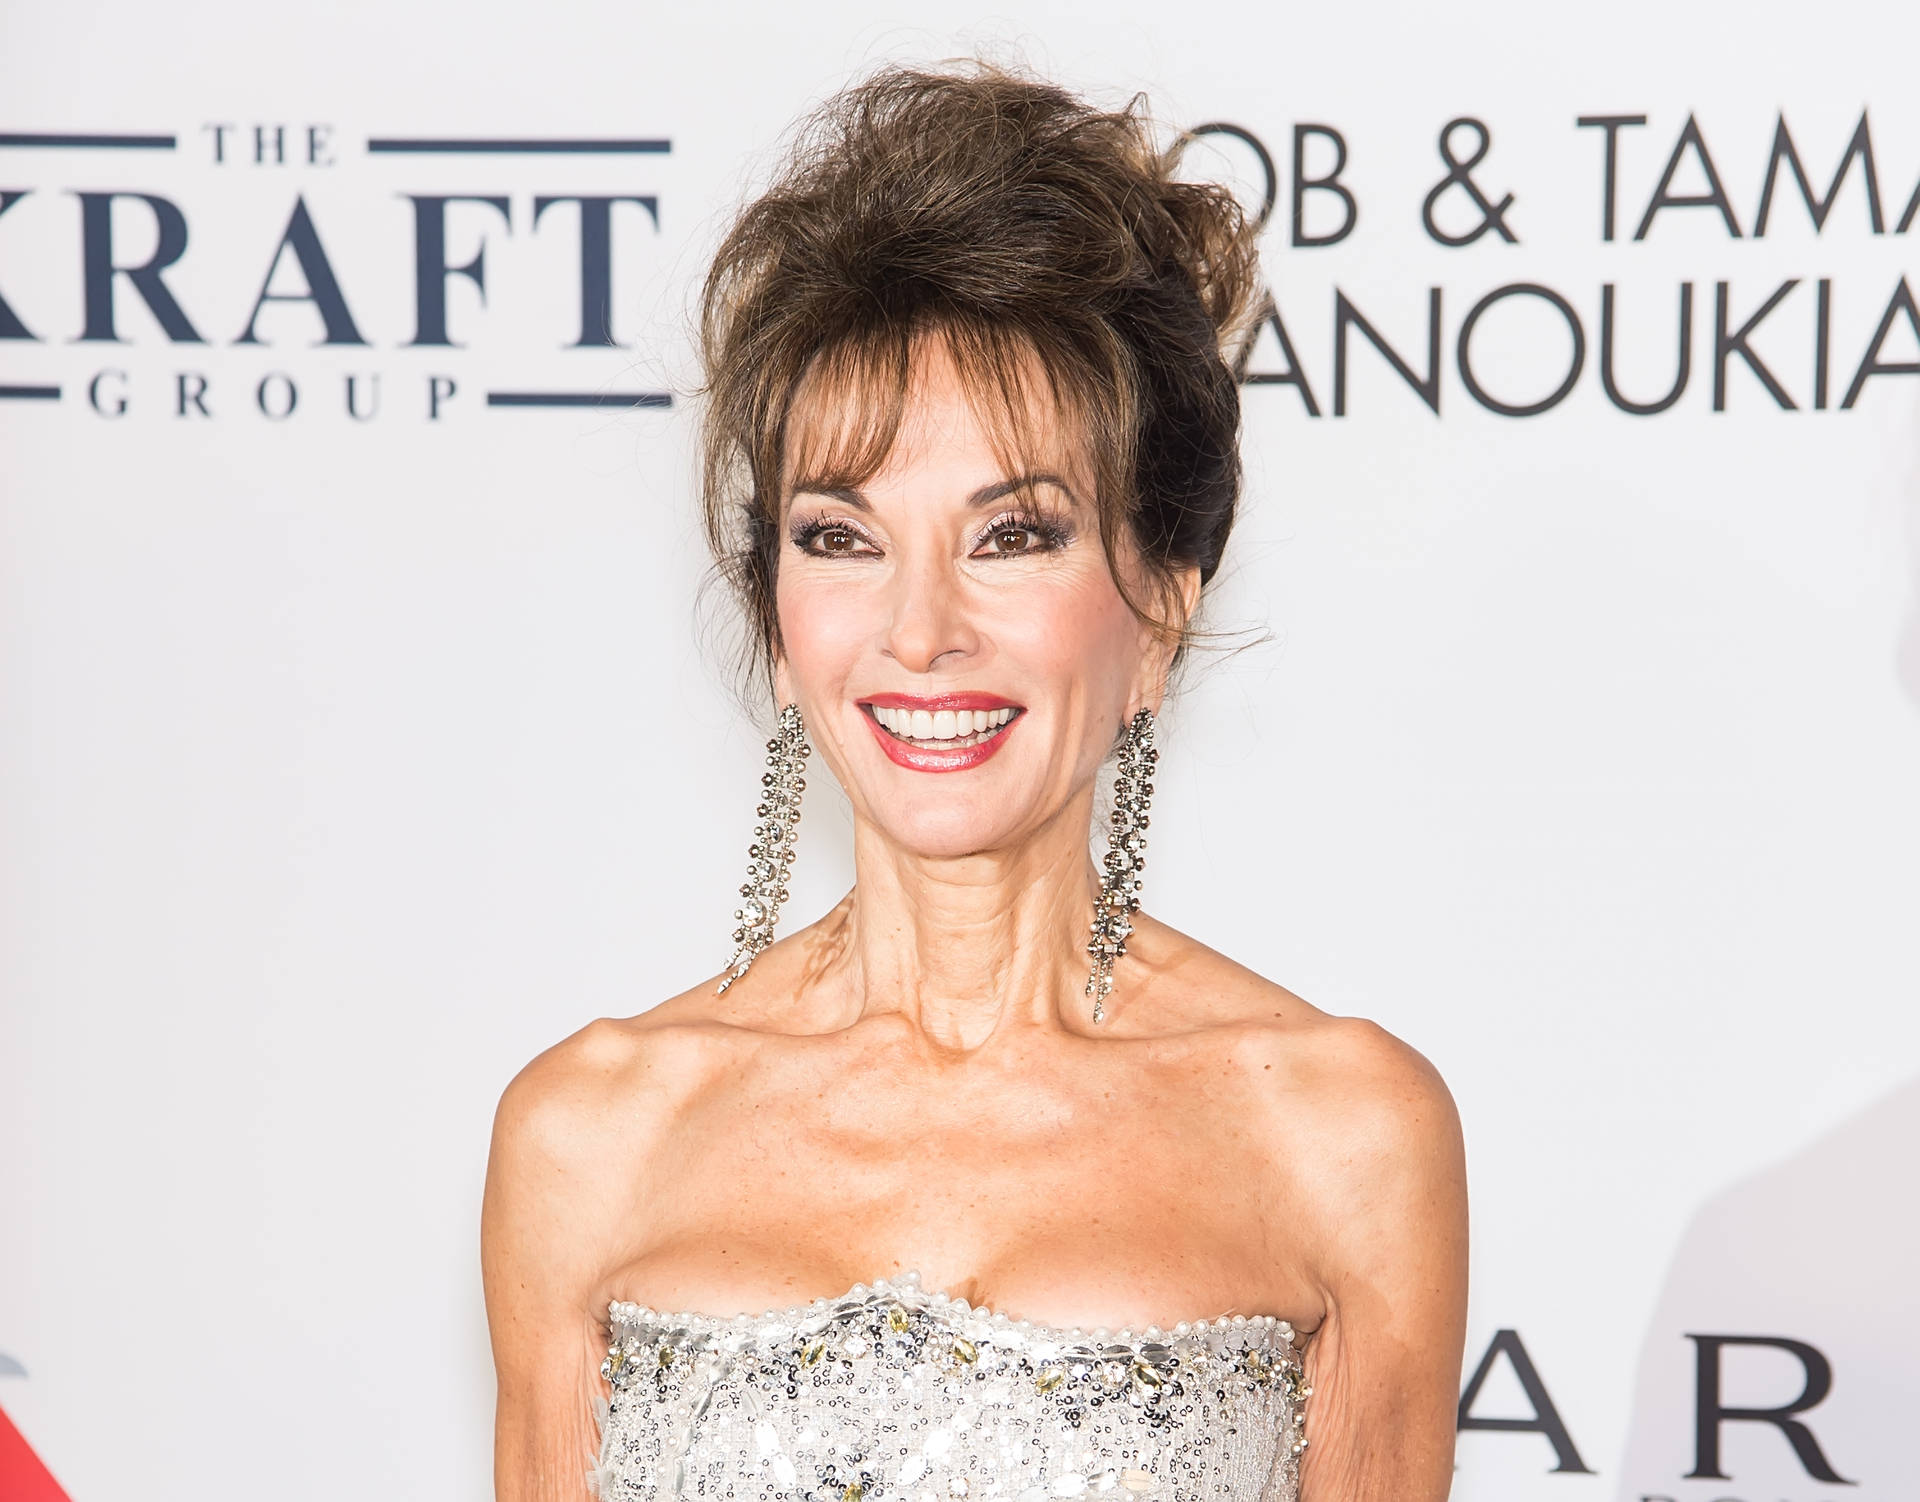 Author Susan Lucci At The Kraft Group Event Background